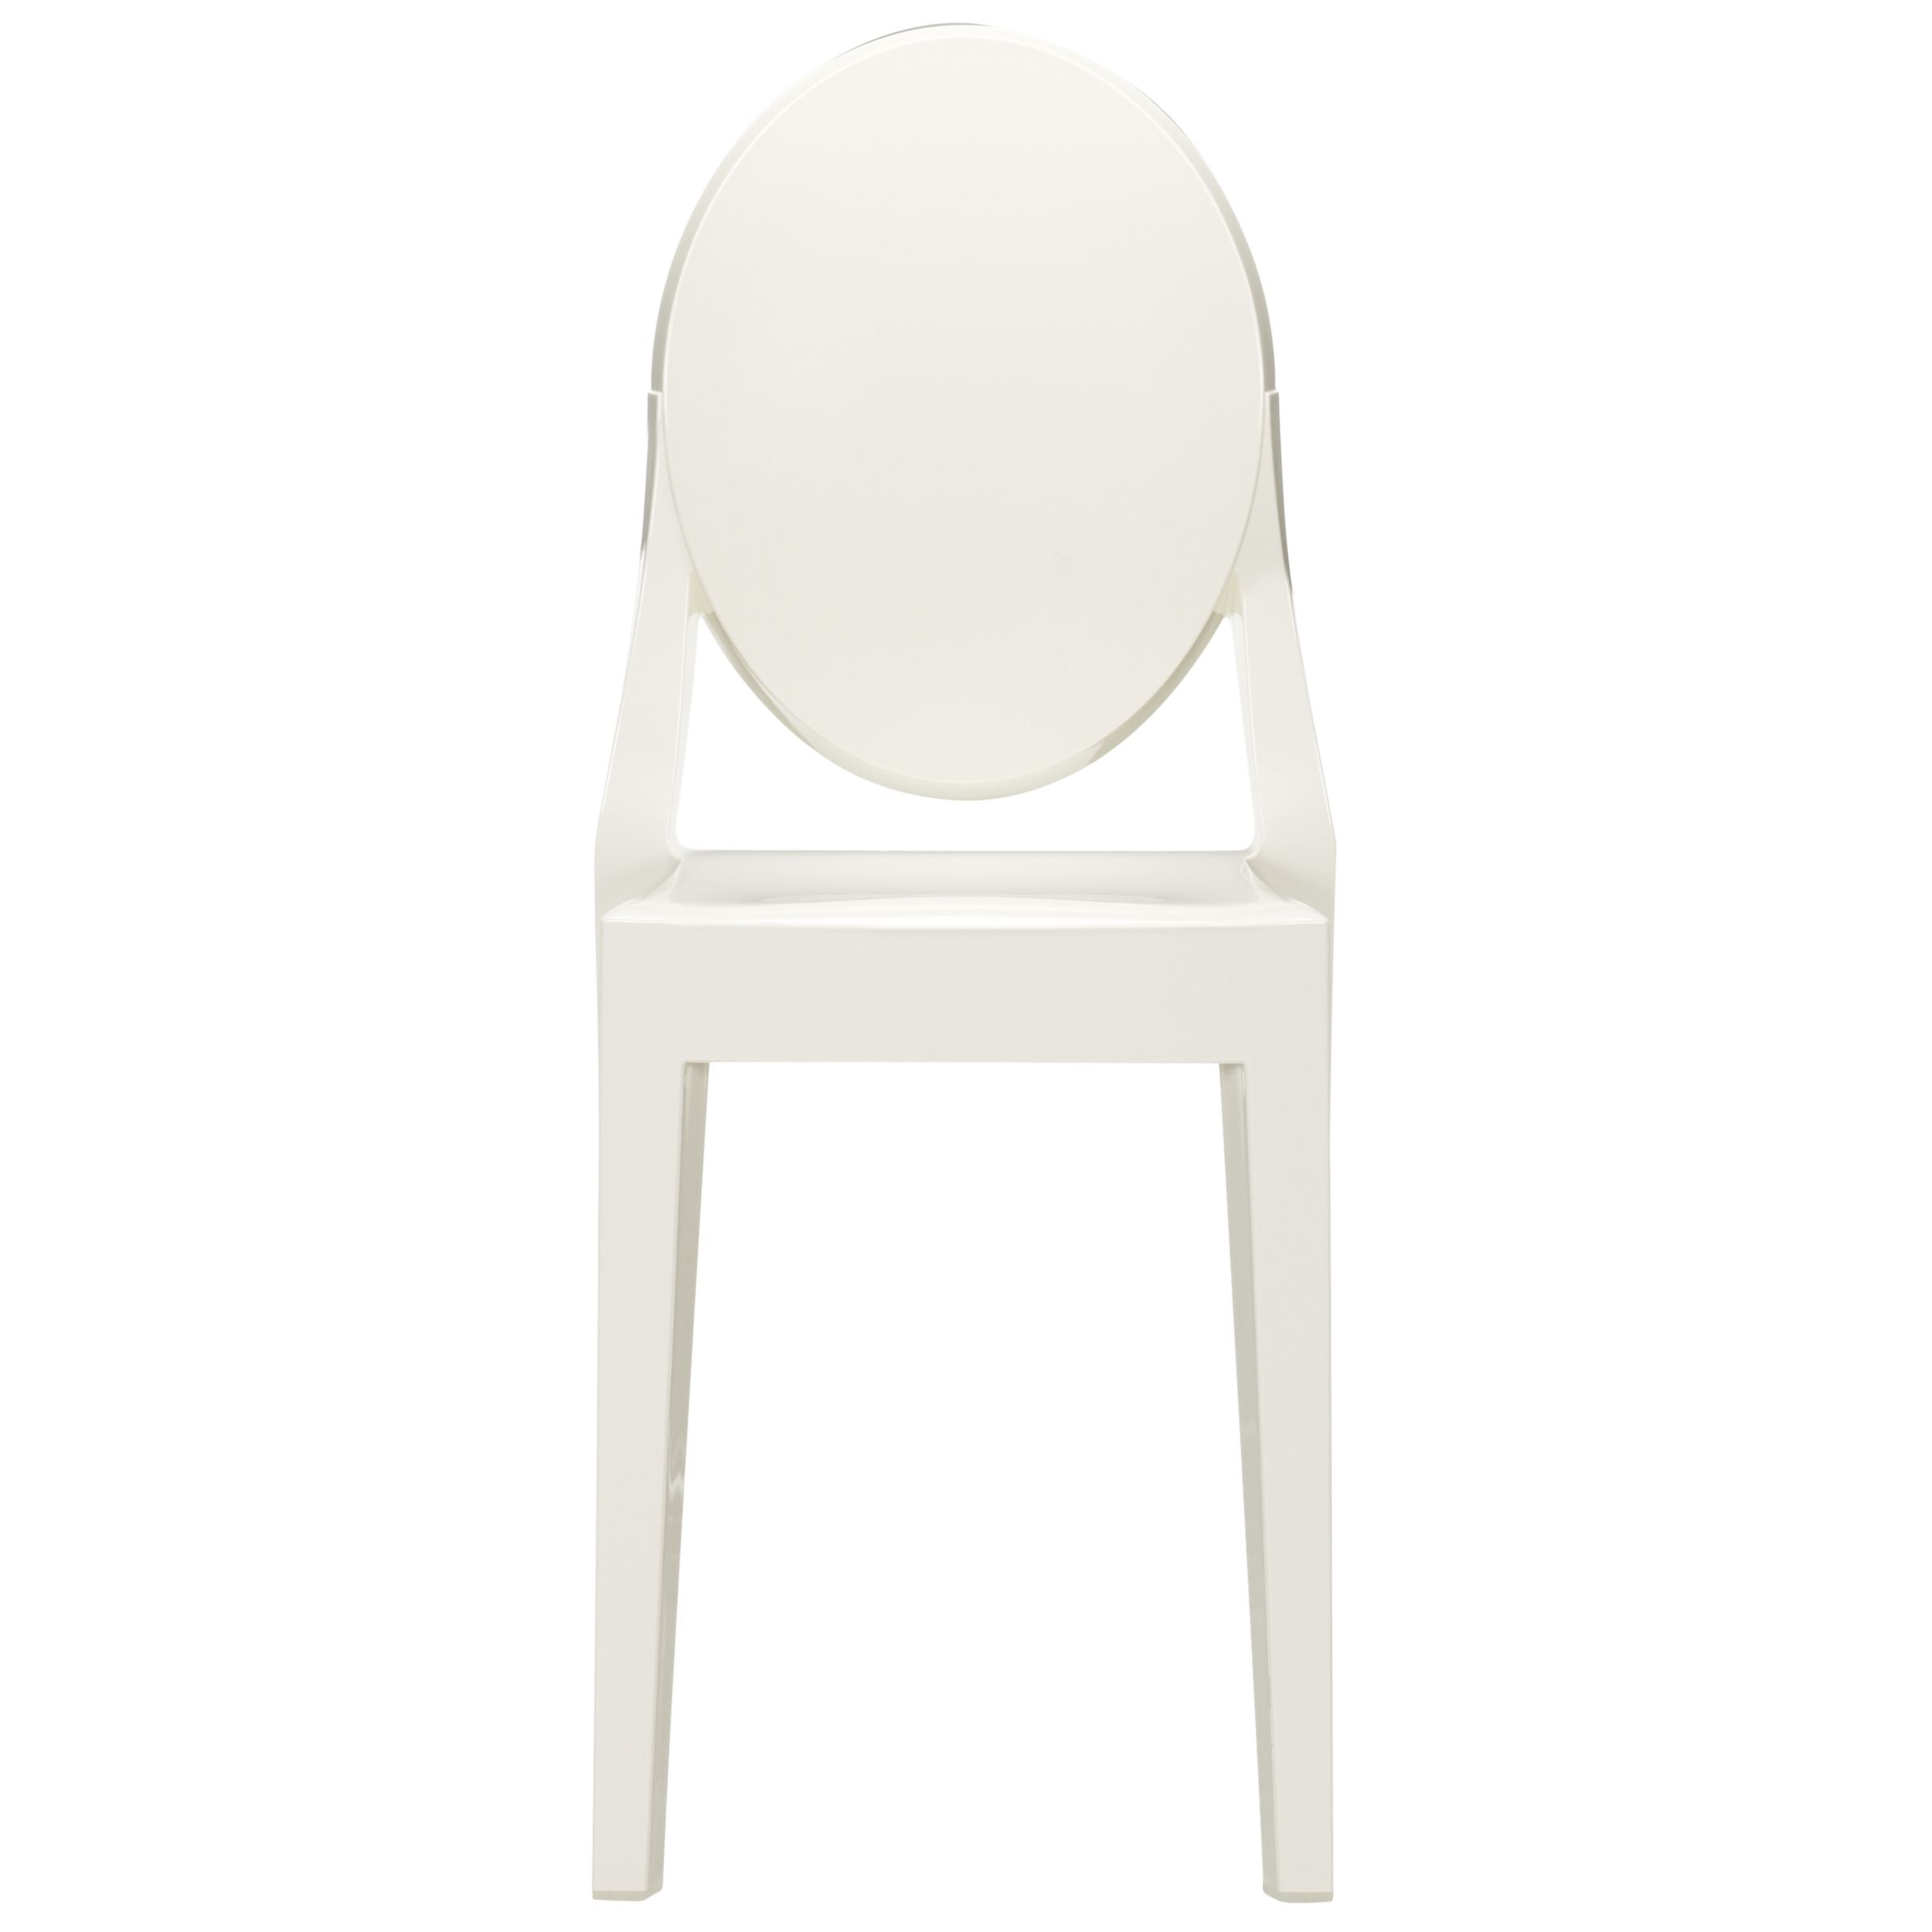 Philippe Starck for Kartell Victoria Ghost Chair, White at John Lewis